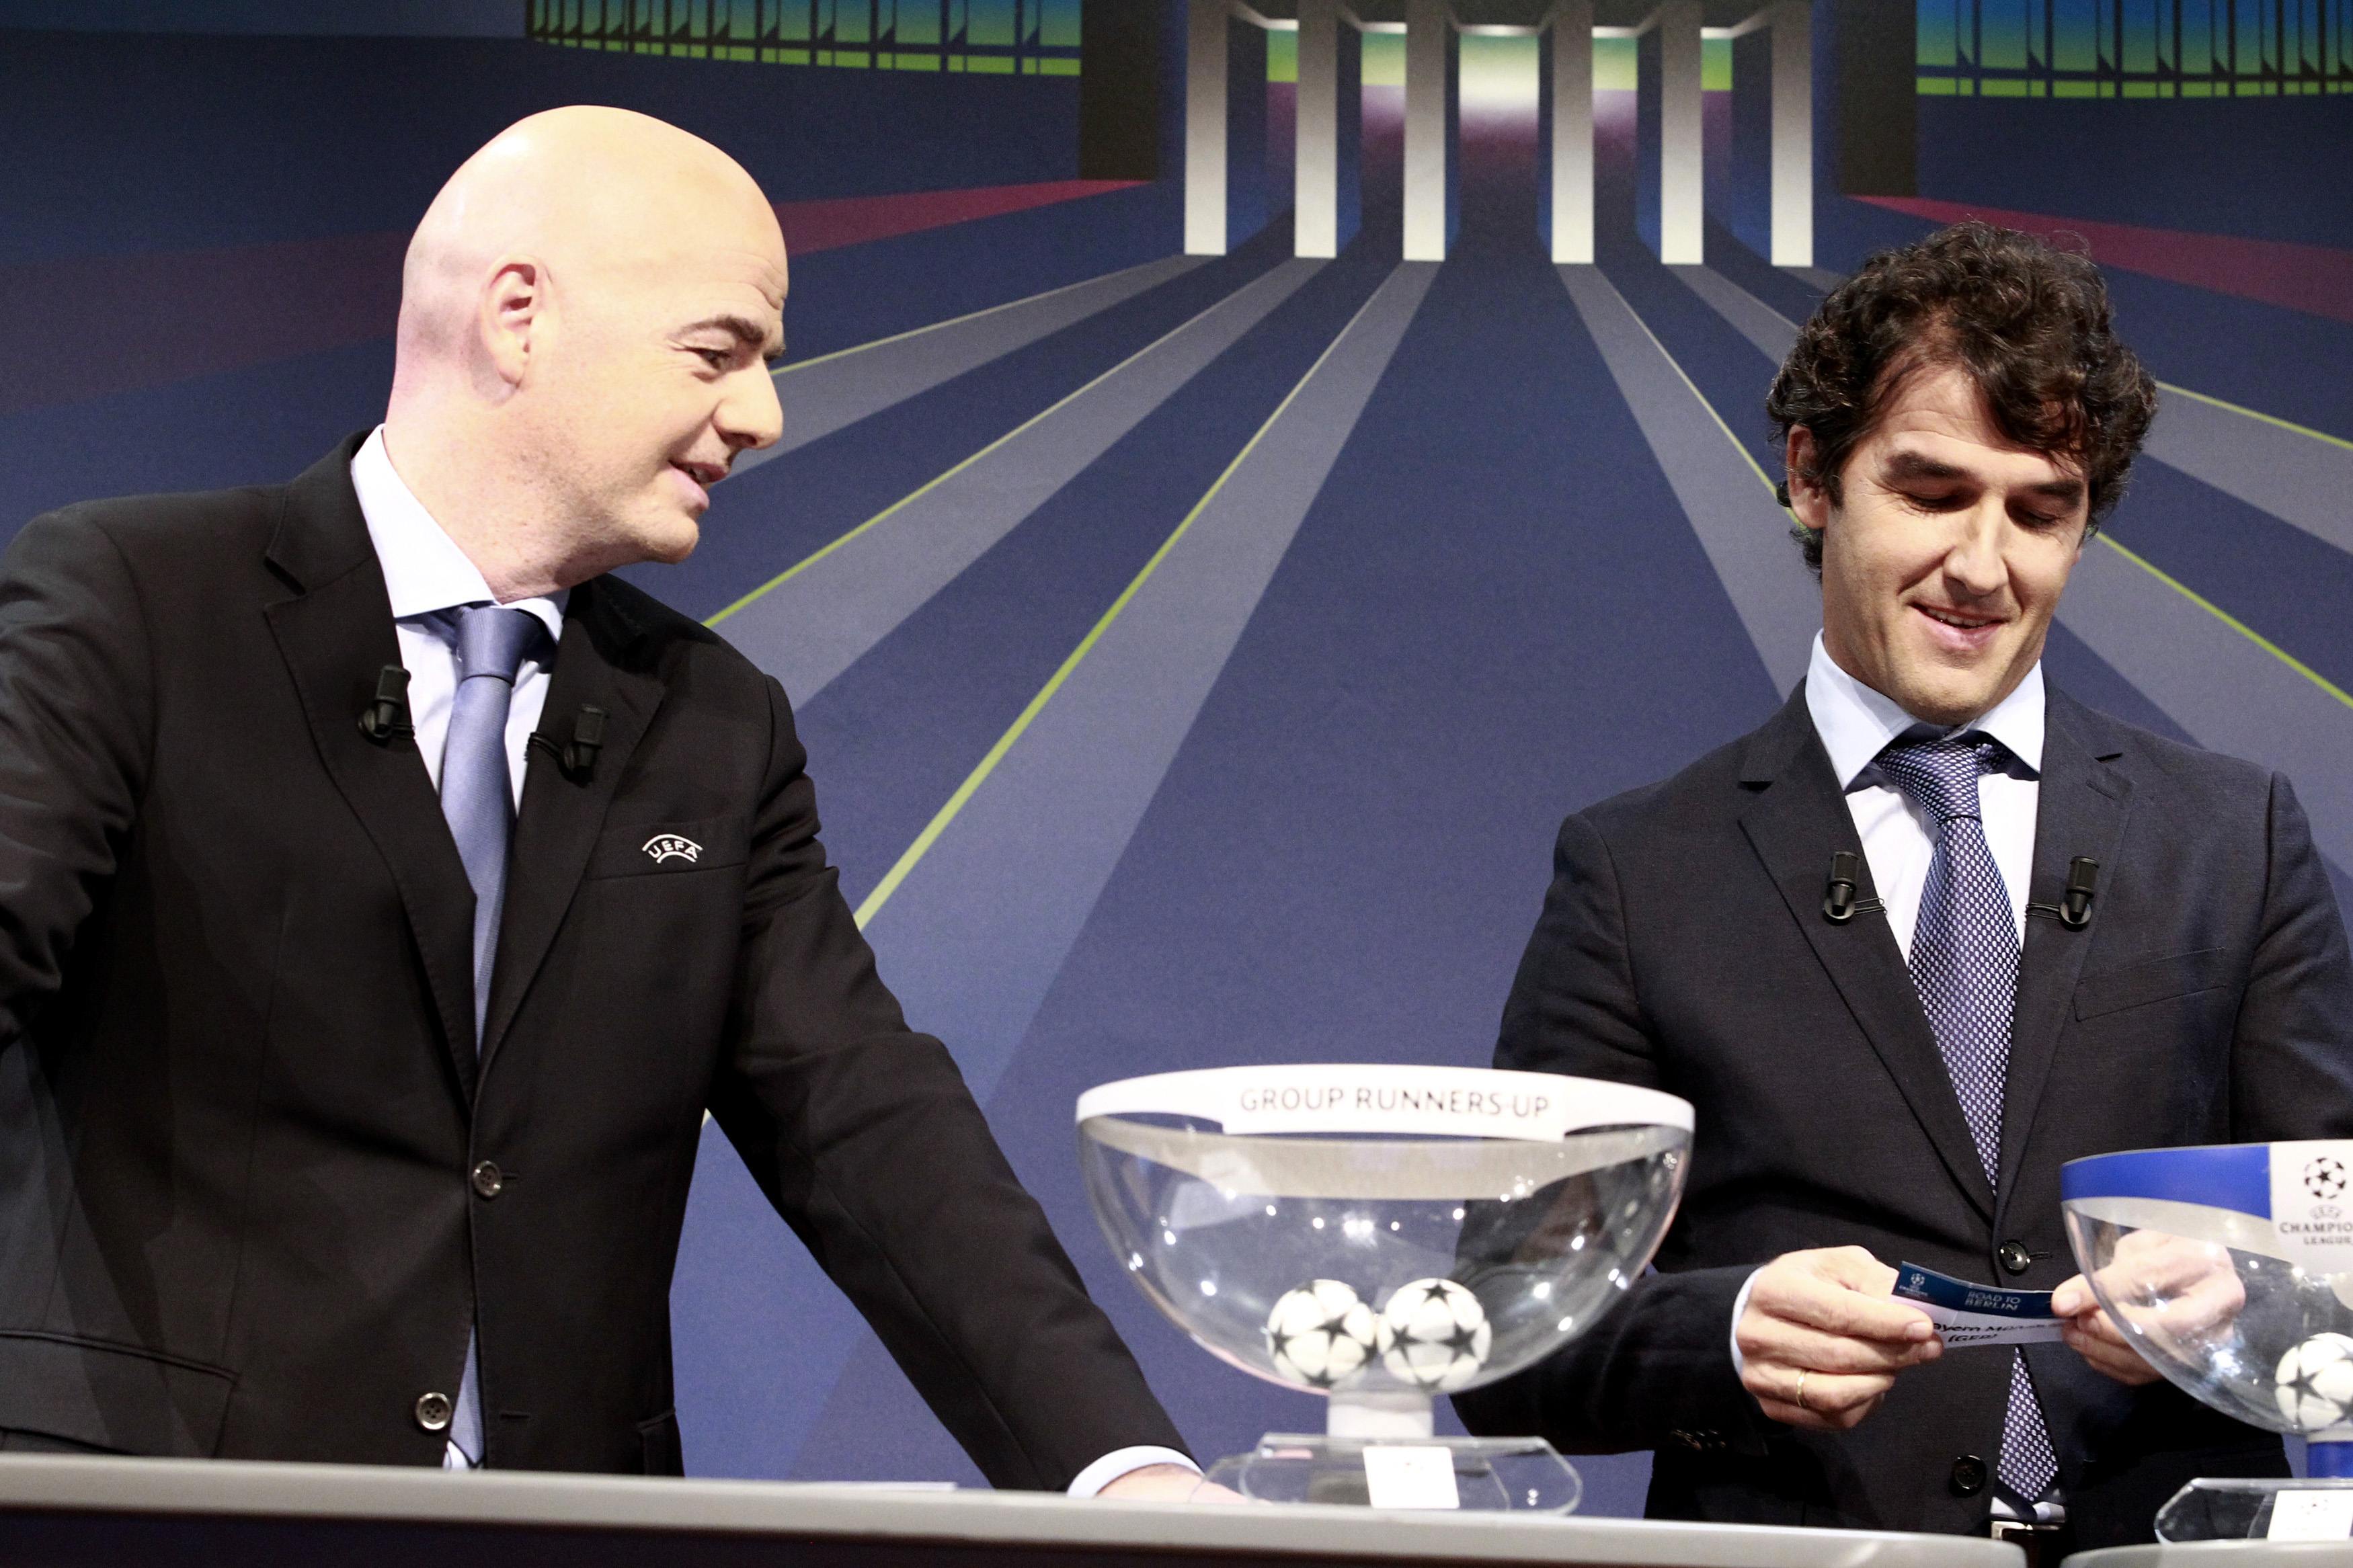 UEFA General Secretary Gianni Infantino (L) stands next to Karl-Heinz Riedle, ambassador for the UEFA Champions League final in Berlin, as they conduct the draw for Champions League round of 16 soccer matches at the UEFA headquarters in Nyon December 15, 2014. REUTERS/Pierre Albouy (SWITZERLAND - Tags: SPORT SOCCER)